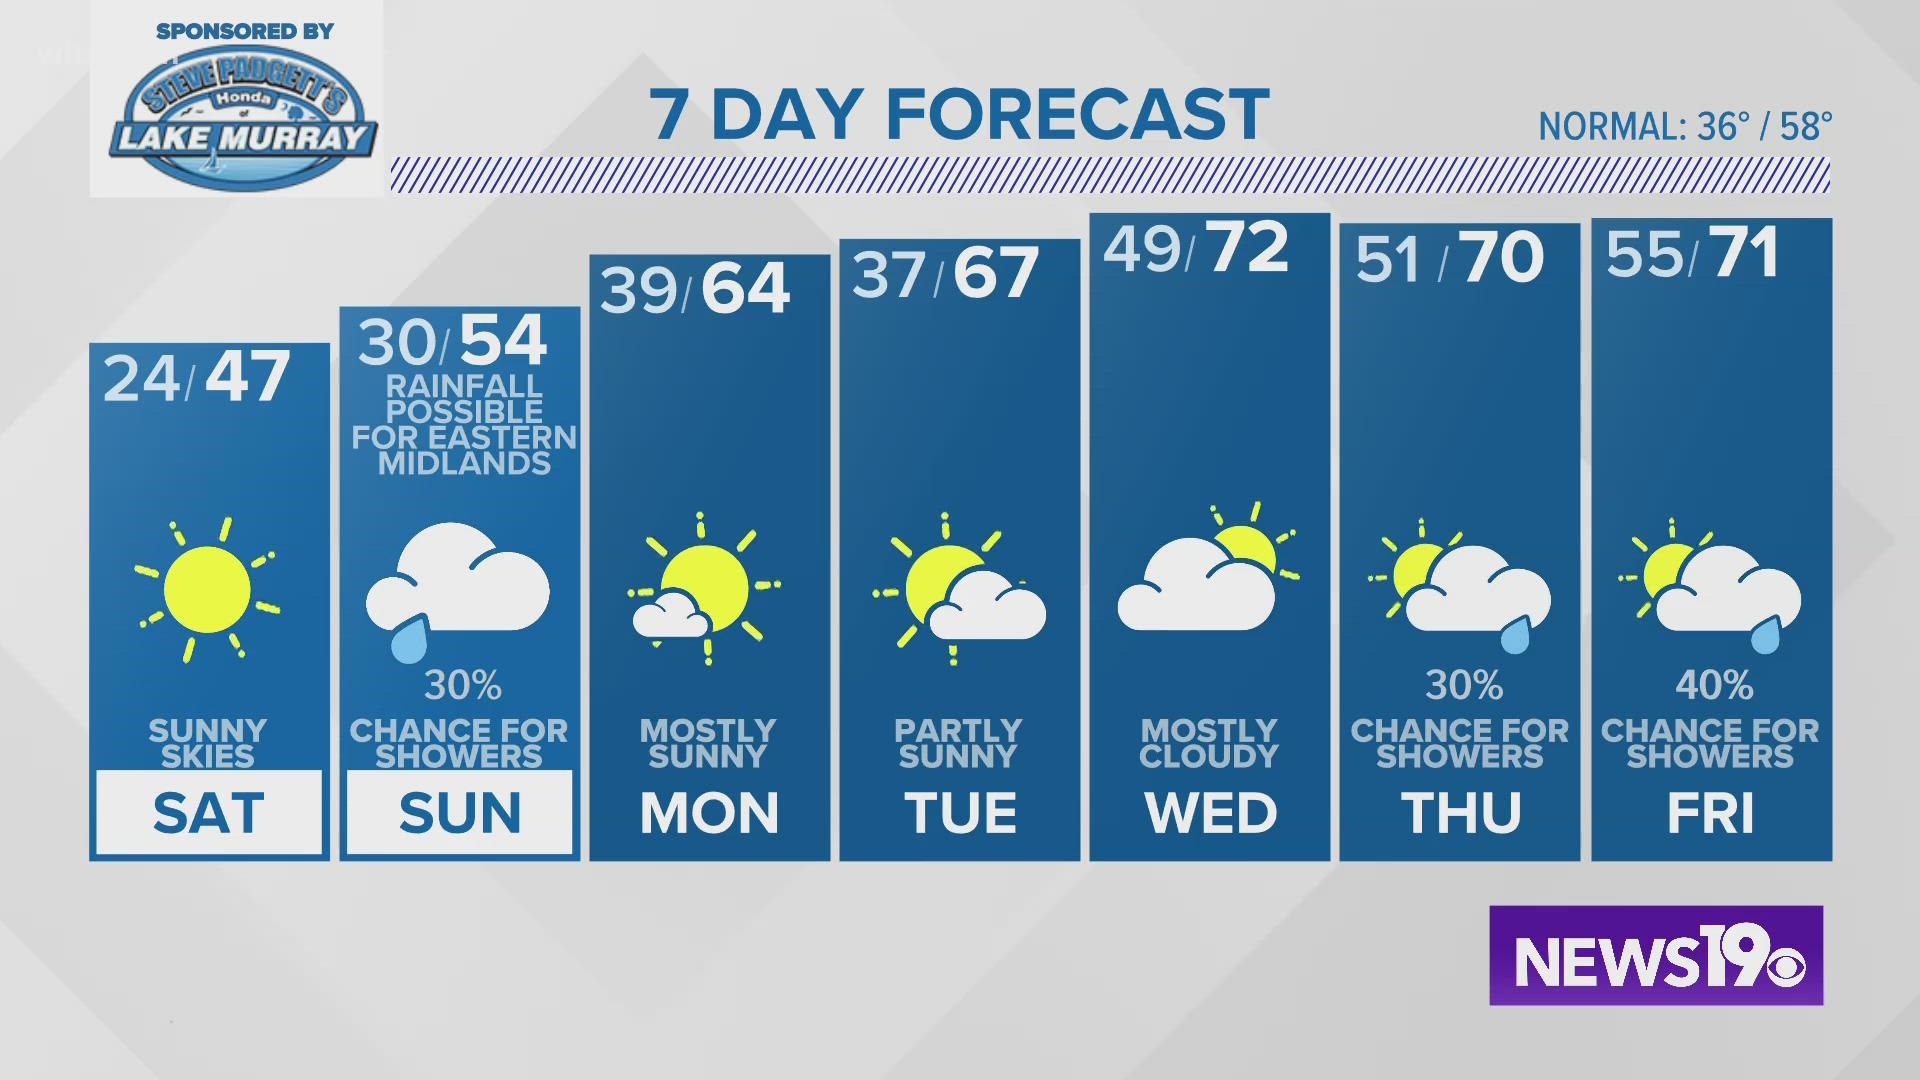 Cold mornings and cooler afternoons return to The Midlands this weekend.